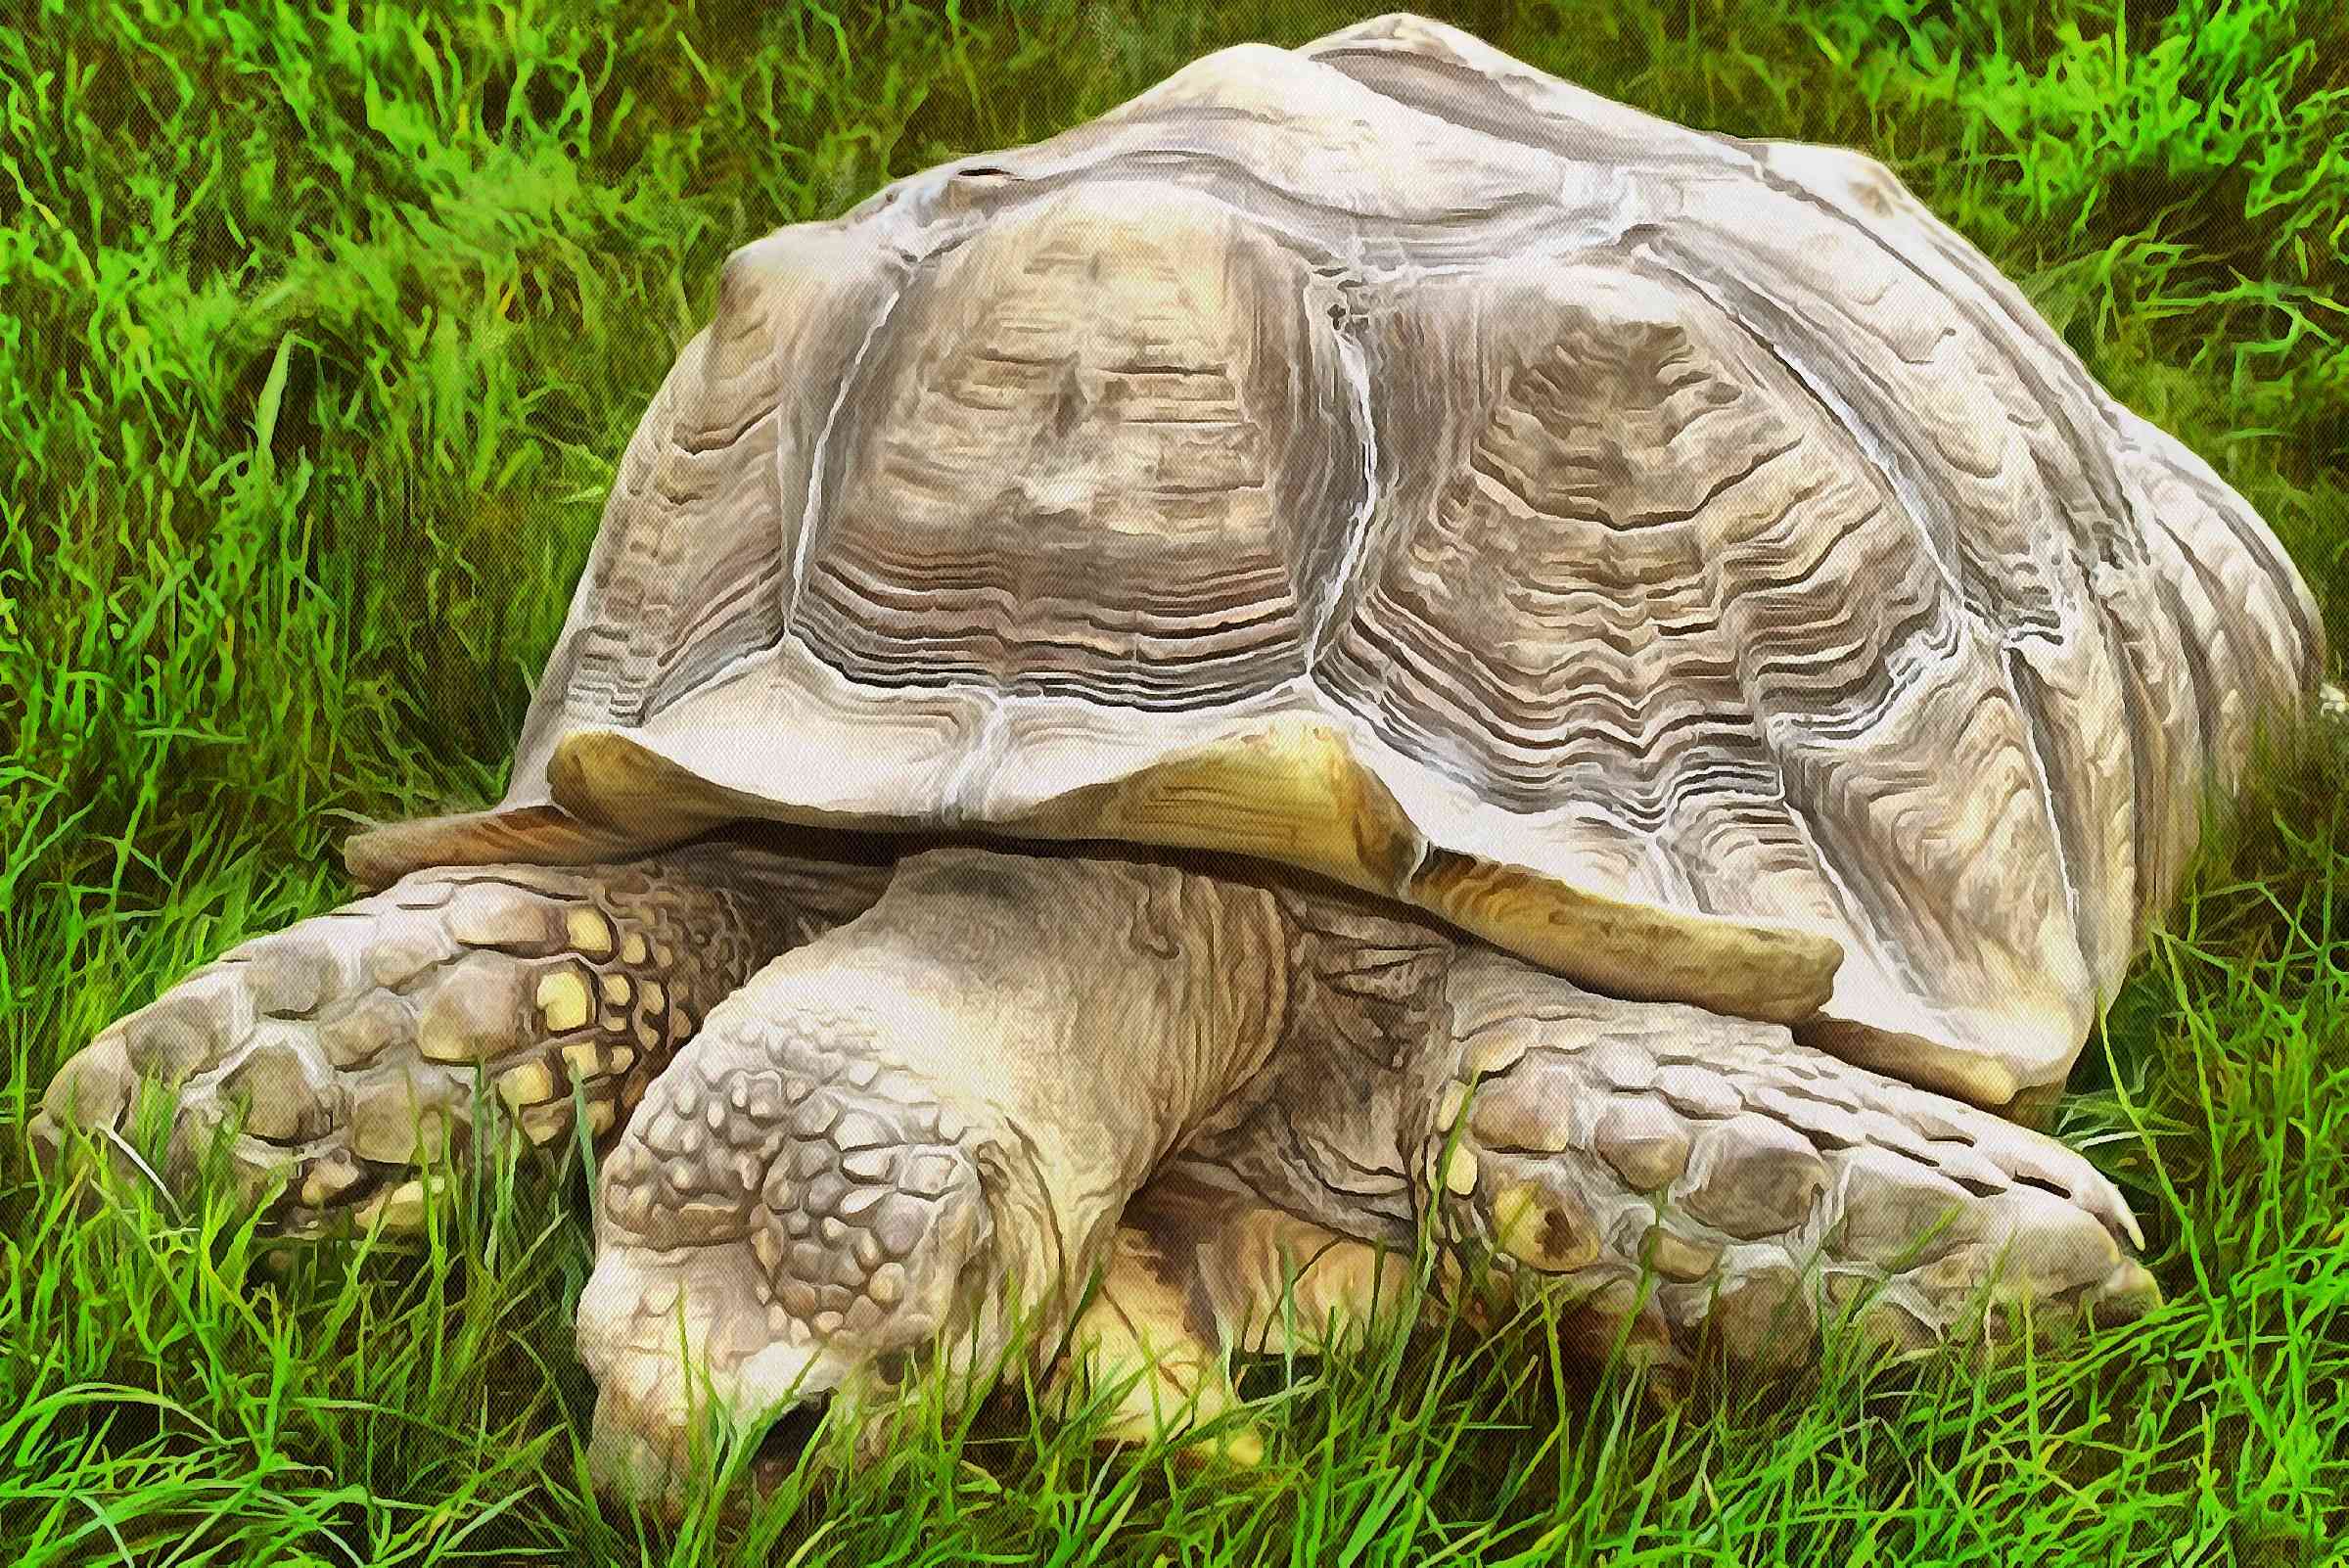 Free Tortoise images, Turtle free images,  – Turtle public domain images, Tortoise free , Turtle stock free images, free images turtles, tortoise public domain images!